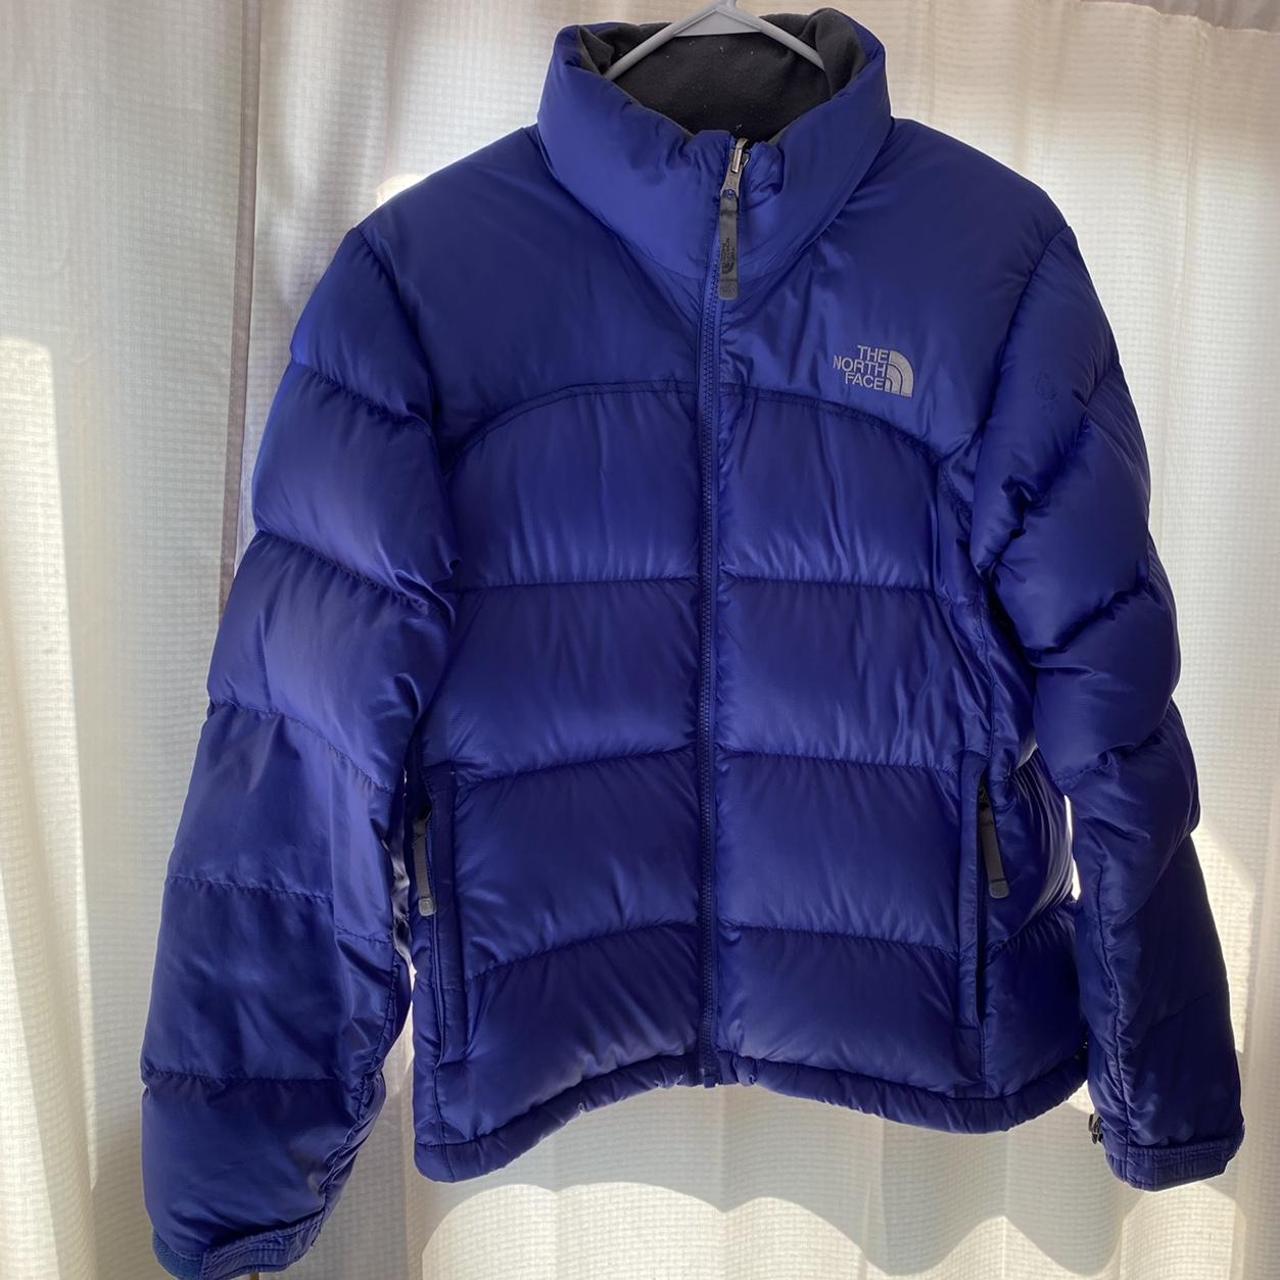 Product Image 1 - THE NORTH FACE PUFFER 700